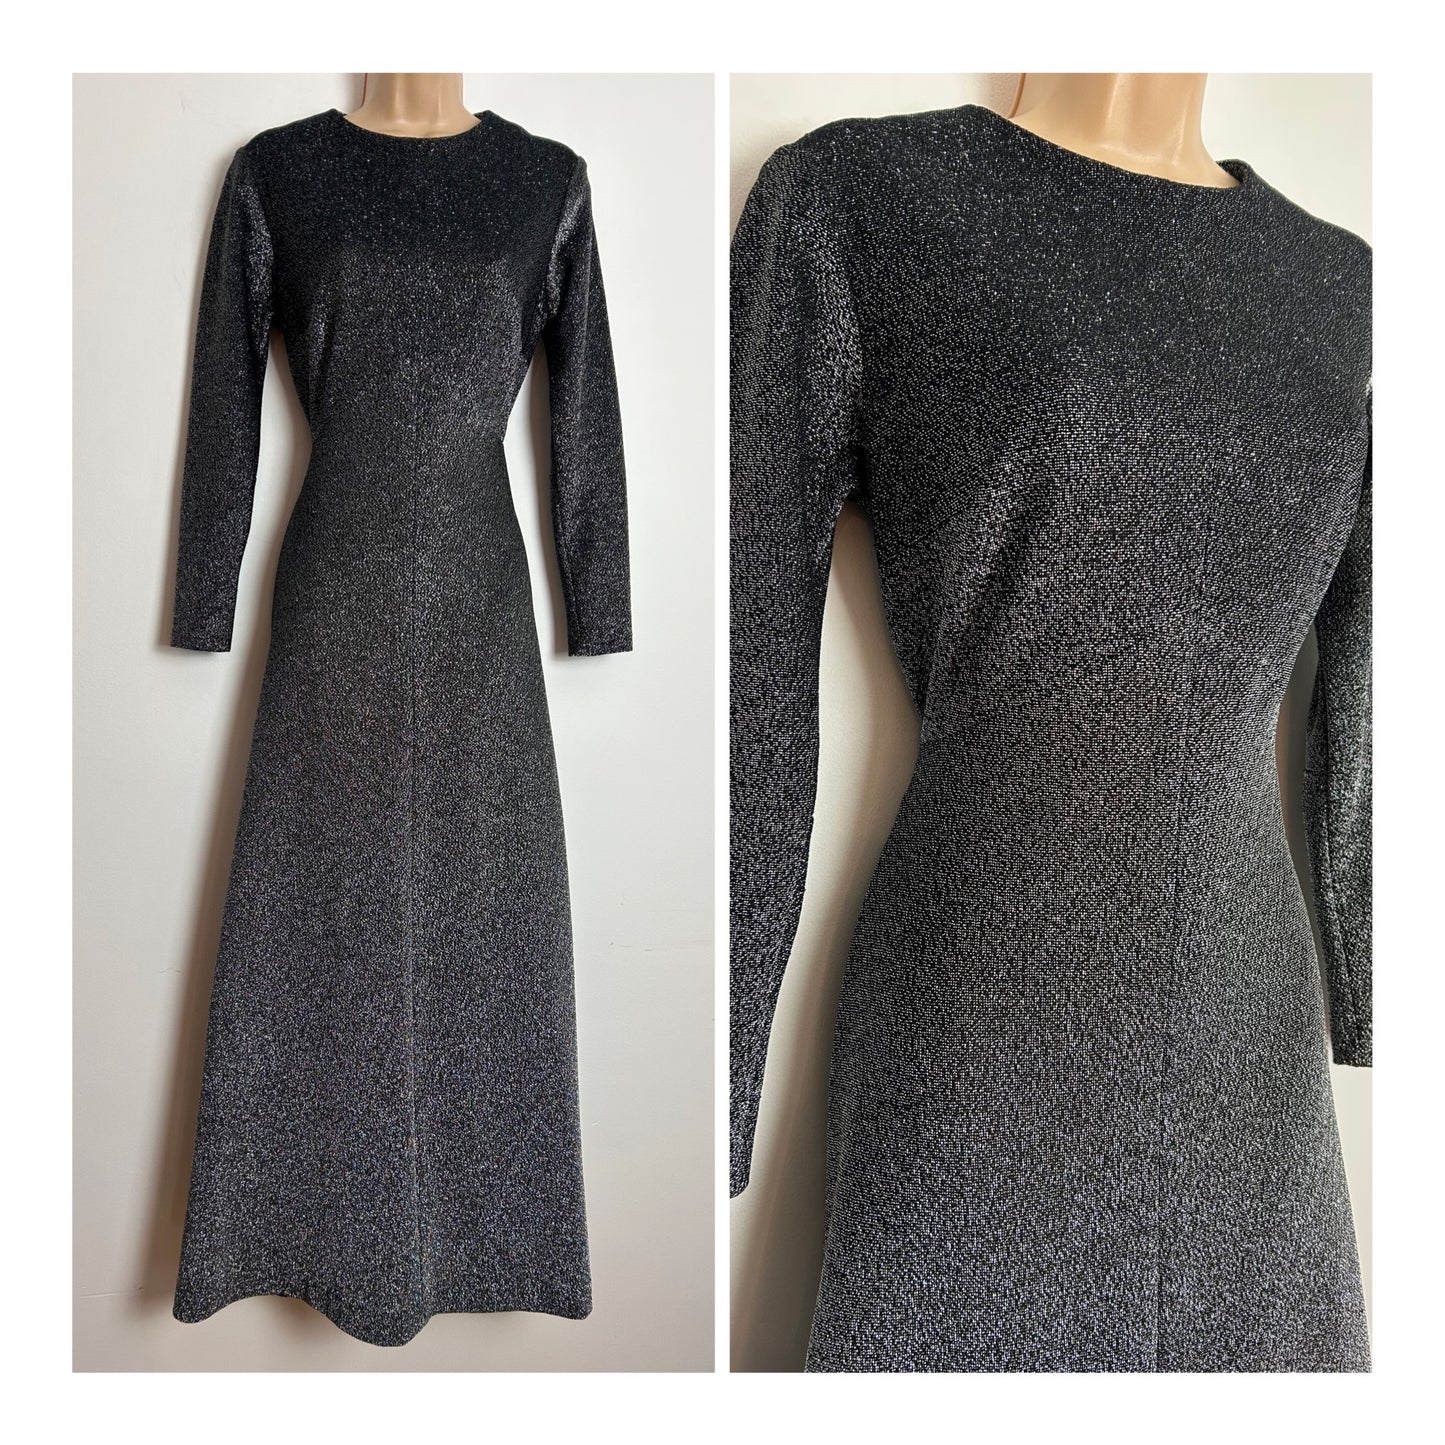 Vintage 1970s Size 10 Gorgeous Black & Silver Glittery Lurex Long Sleeve Occasion Evening Maxi Dress